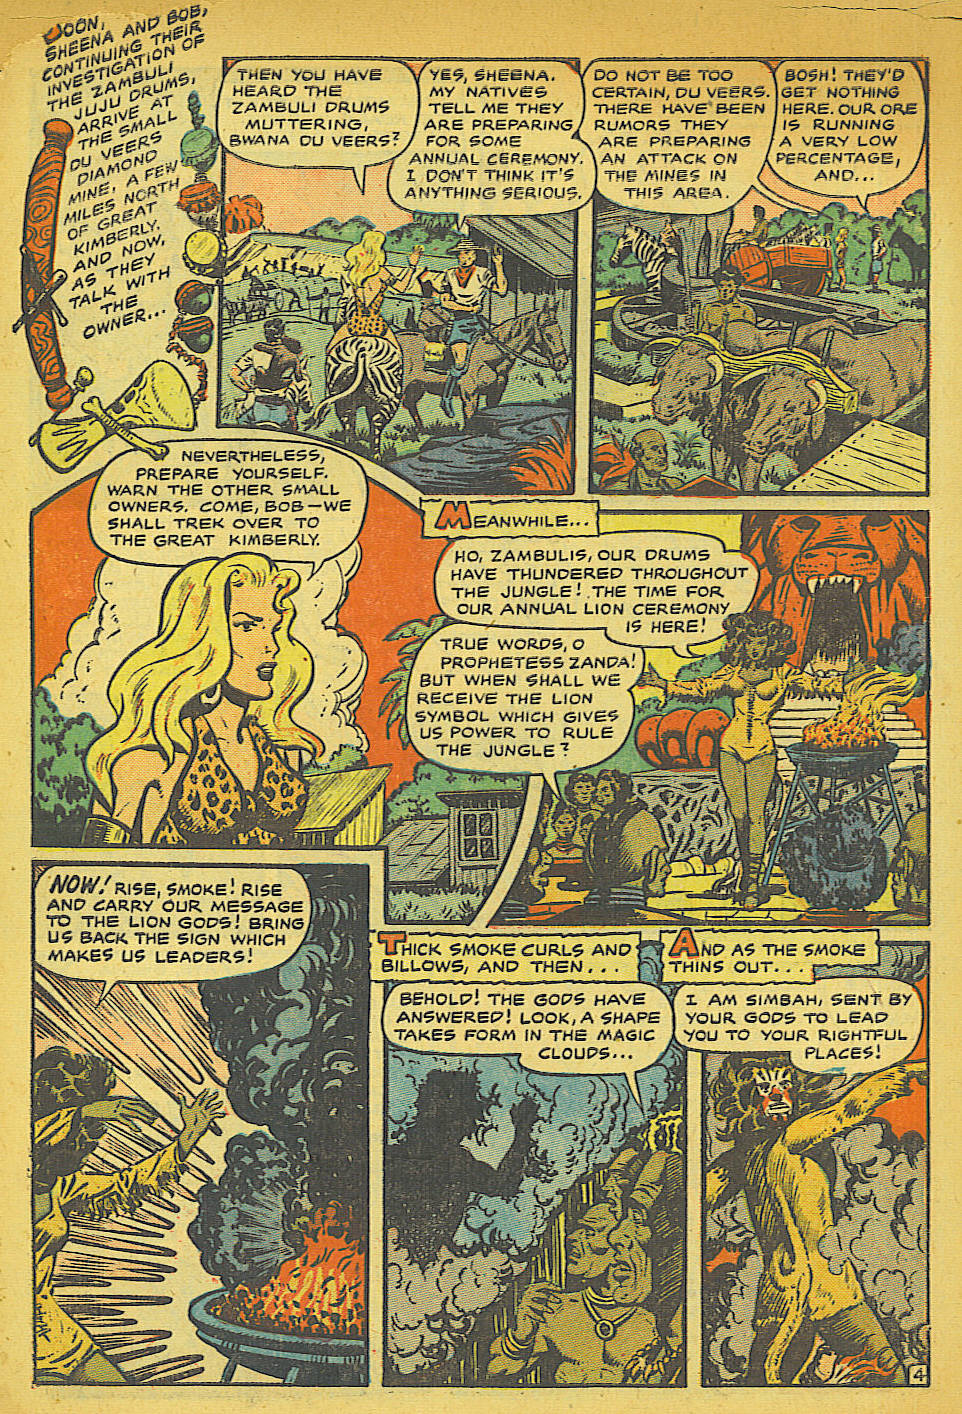 Sheena, Queen of the Jungle (1942) issue 10 - Page 6